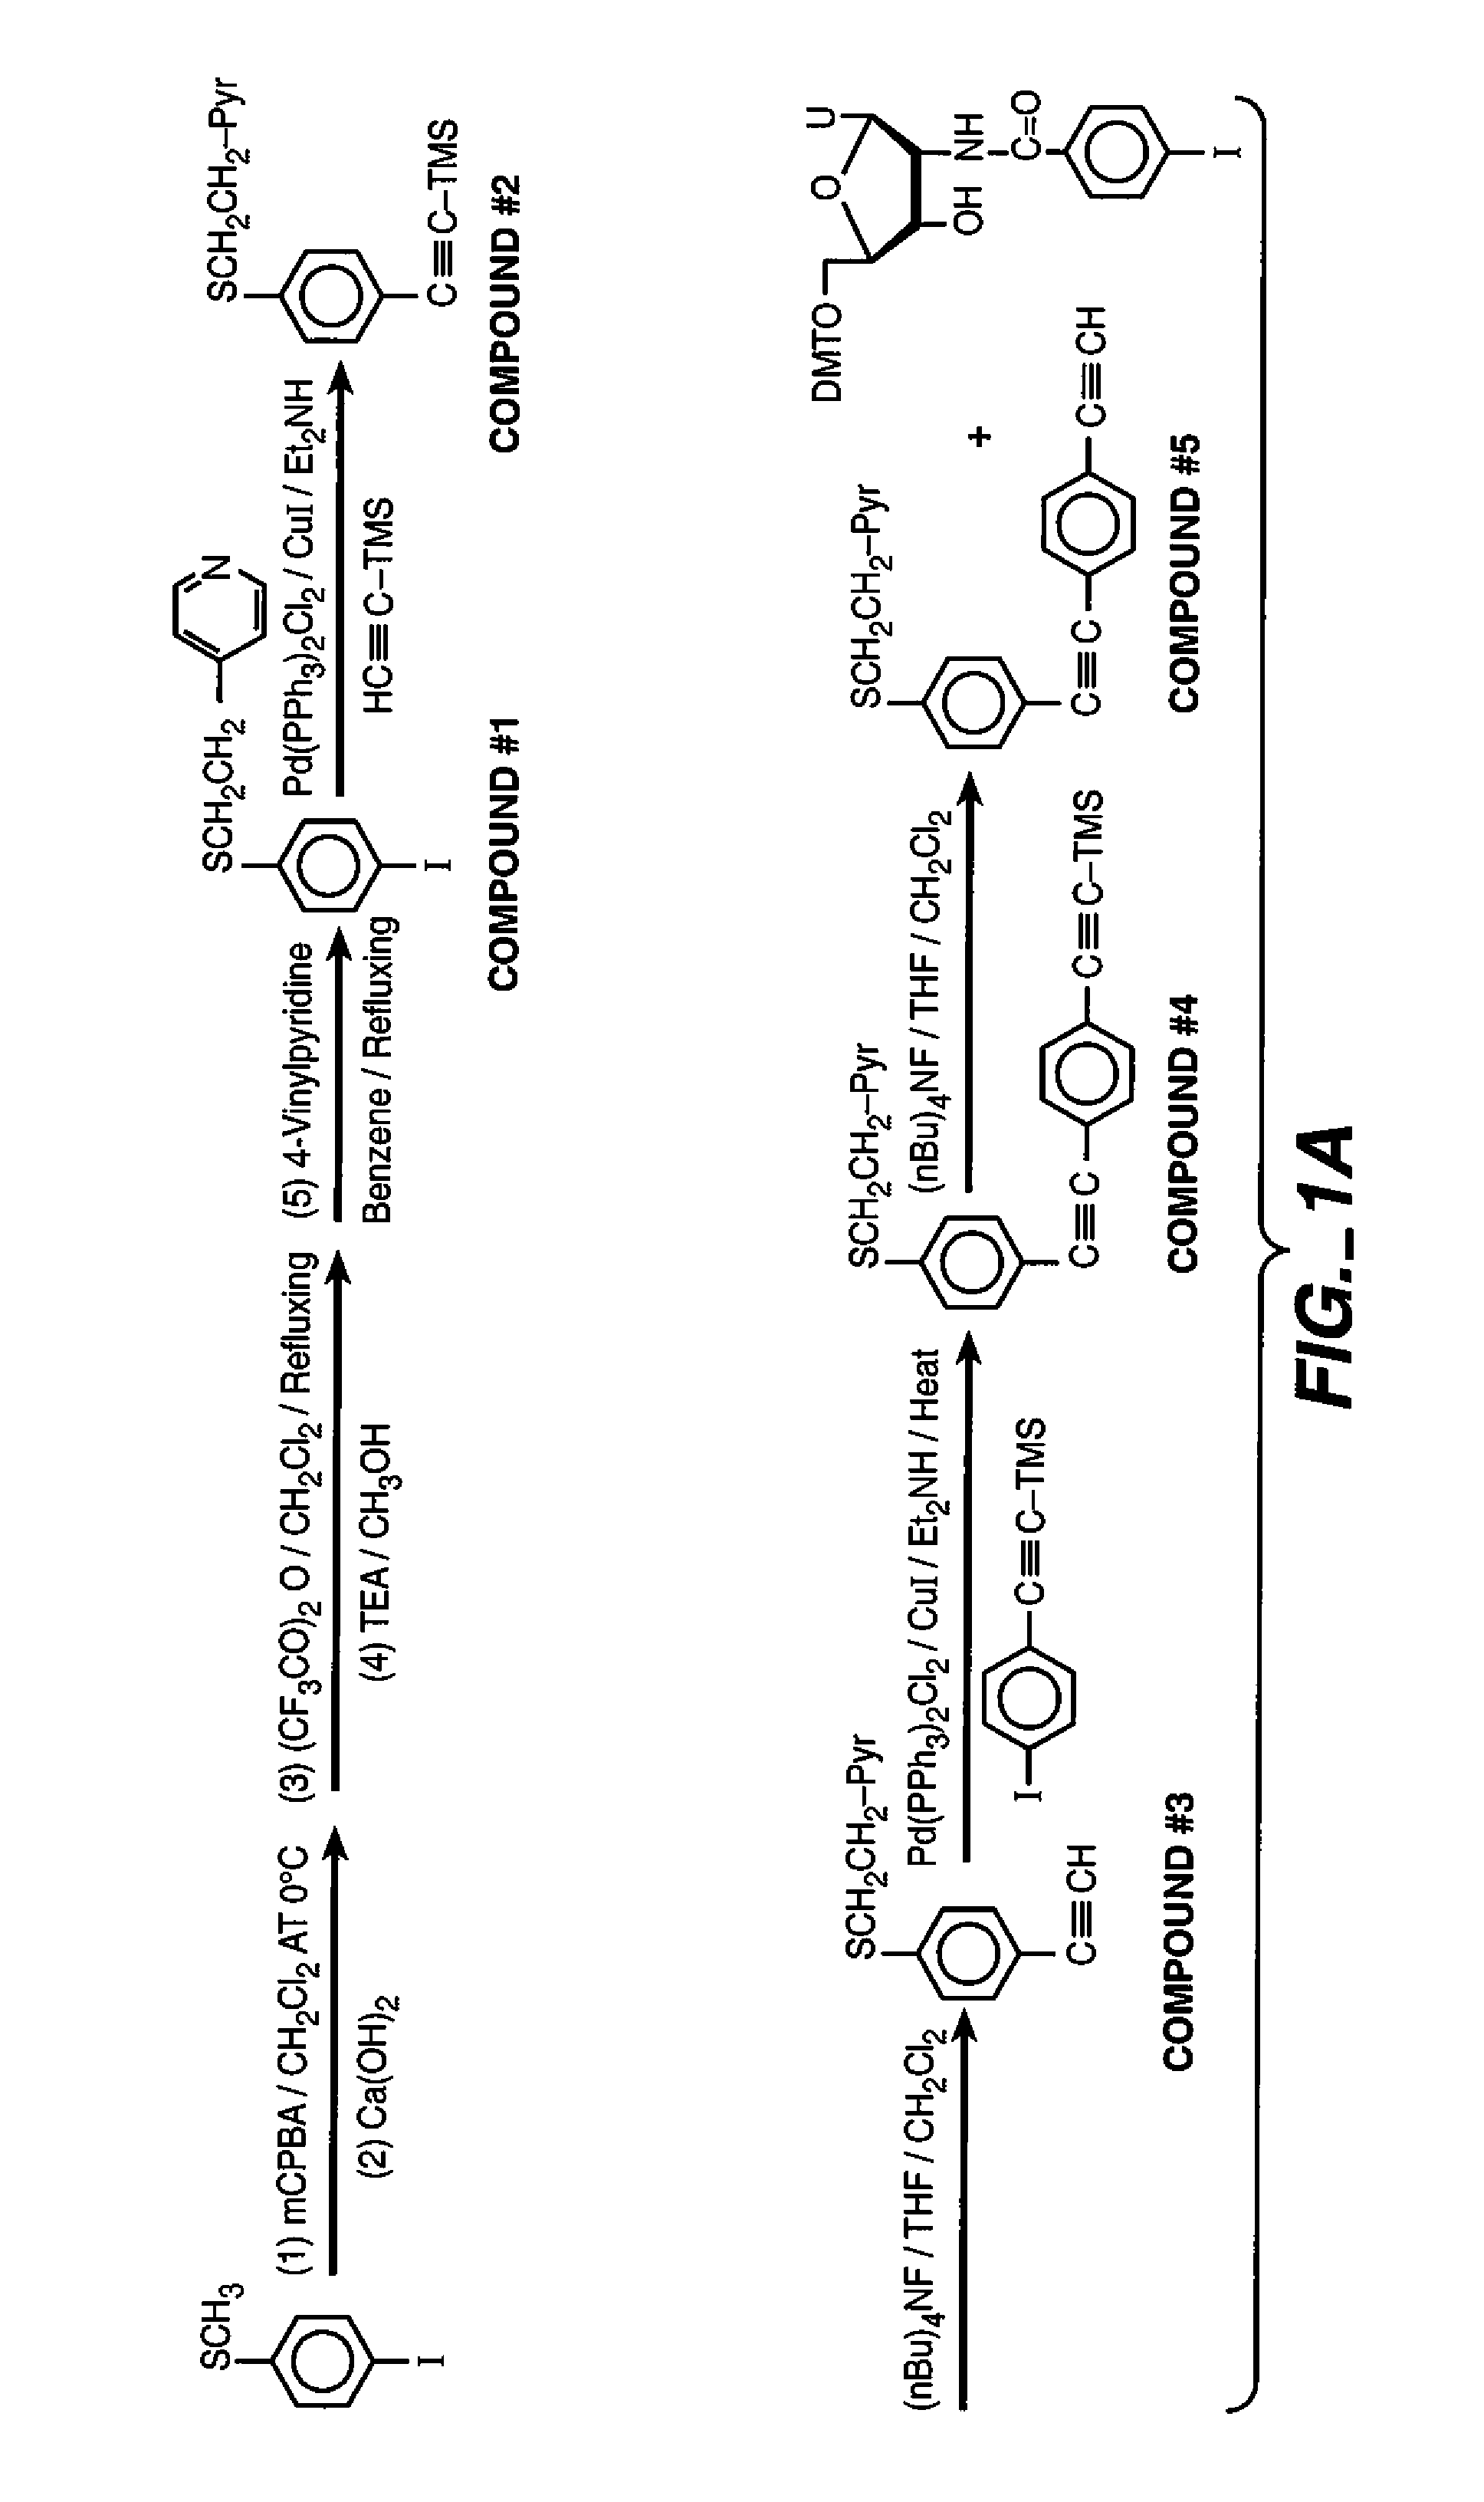 AC/DC voltage apparatus for detection of nucleic acids